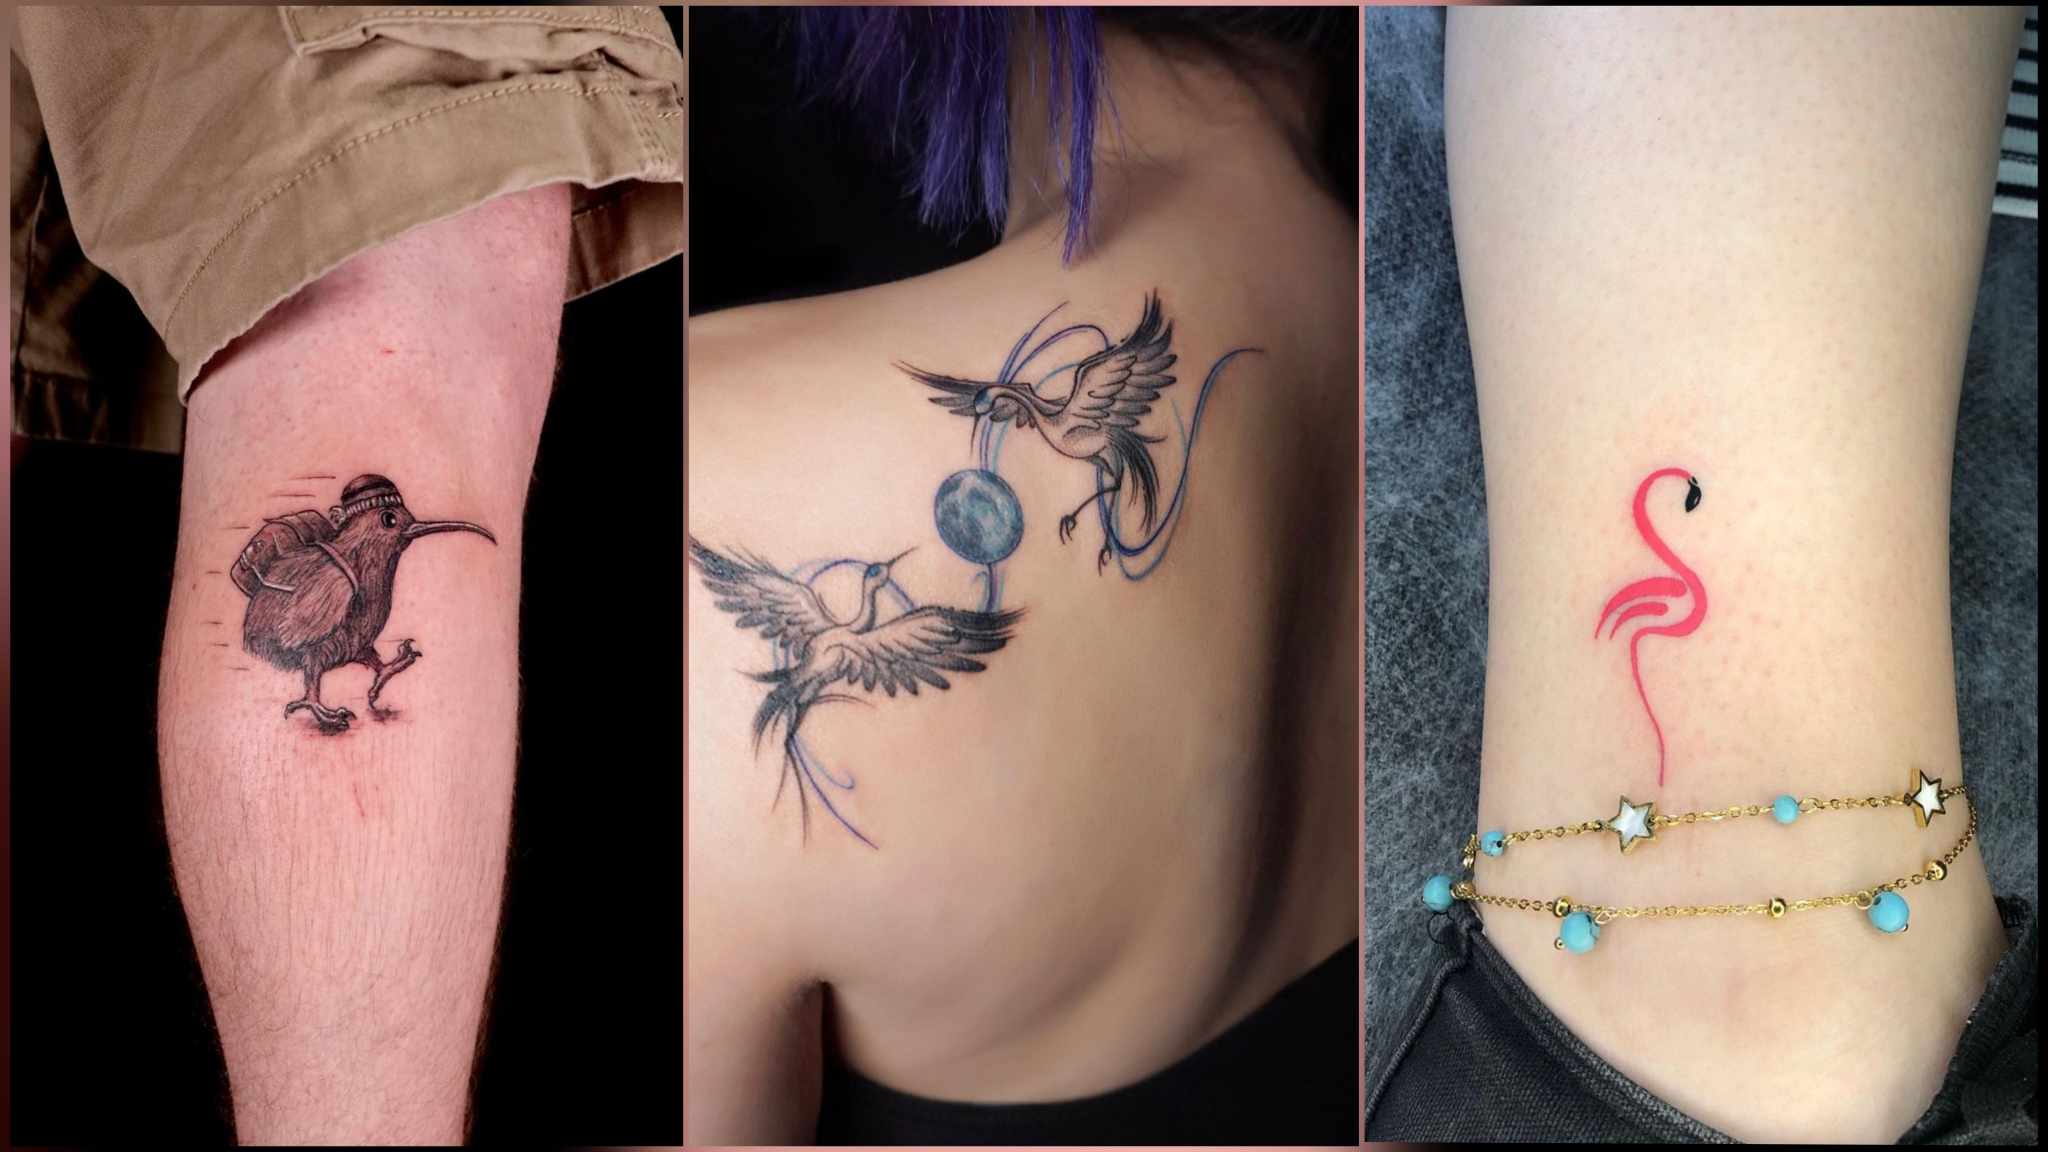 The Meaning of Birds in Tattoos: The Intricate Meanings Behind Popular Tattoo Styles and Symbols - Impeccable Nest